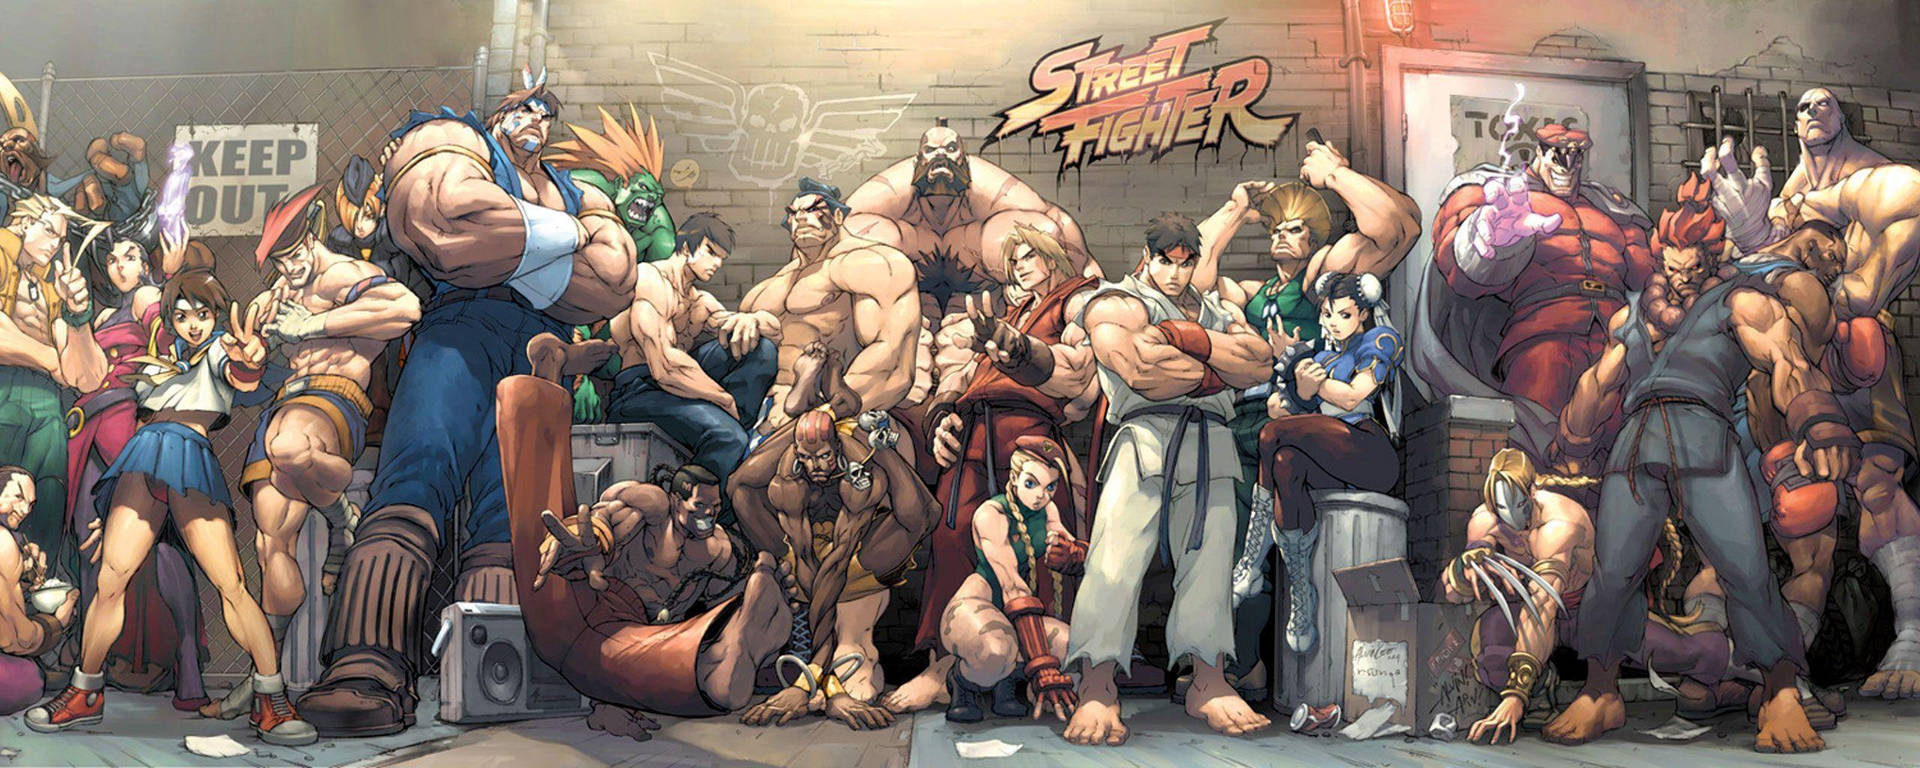 Street Fighter 2560X1024 Wallpaper and Background Image